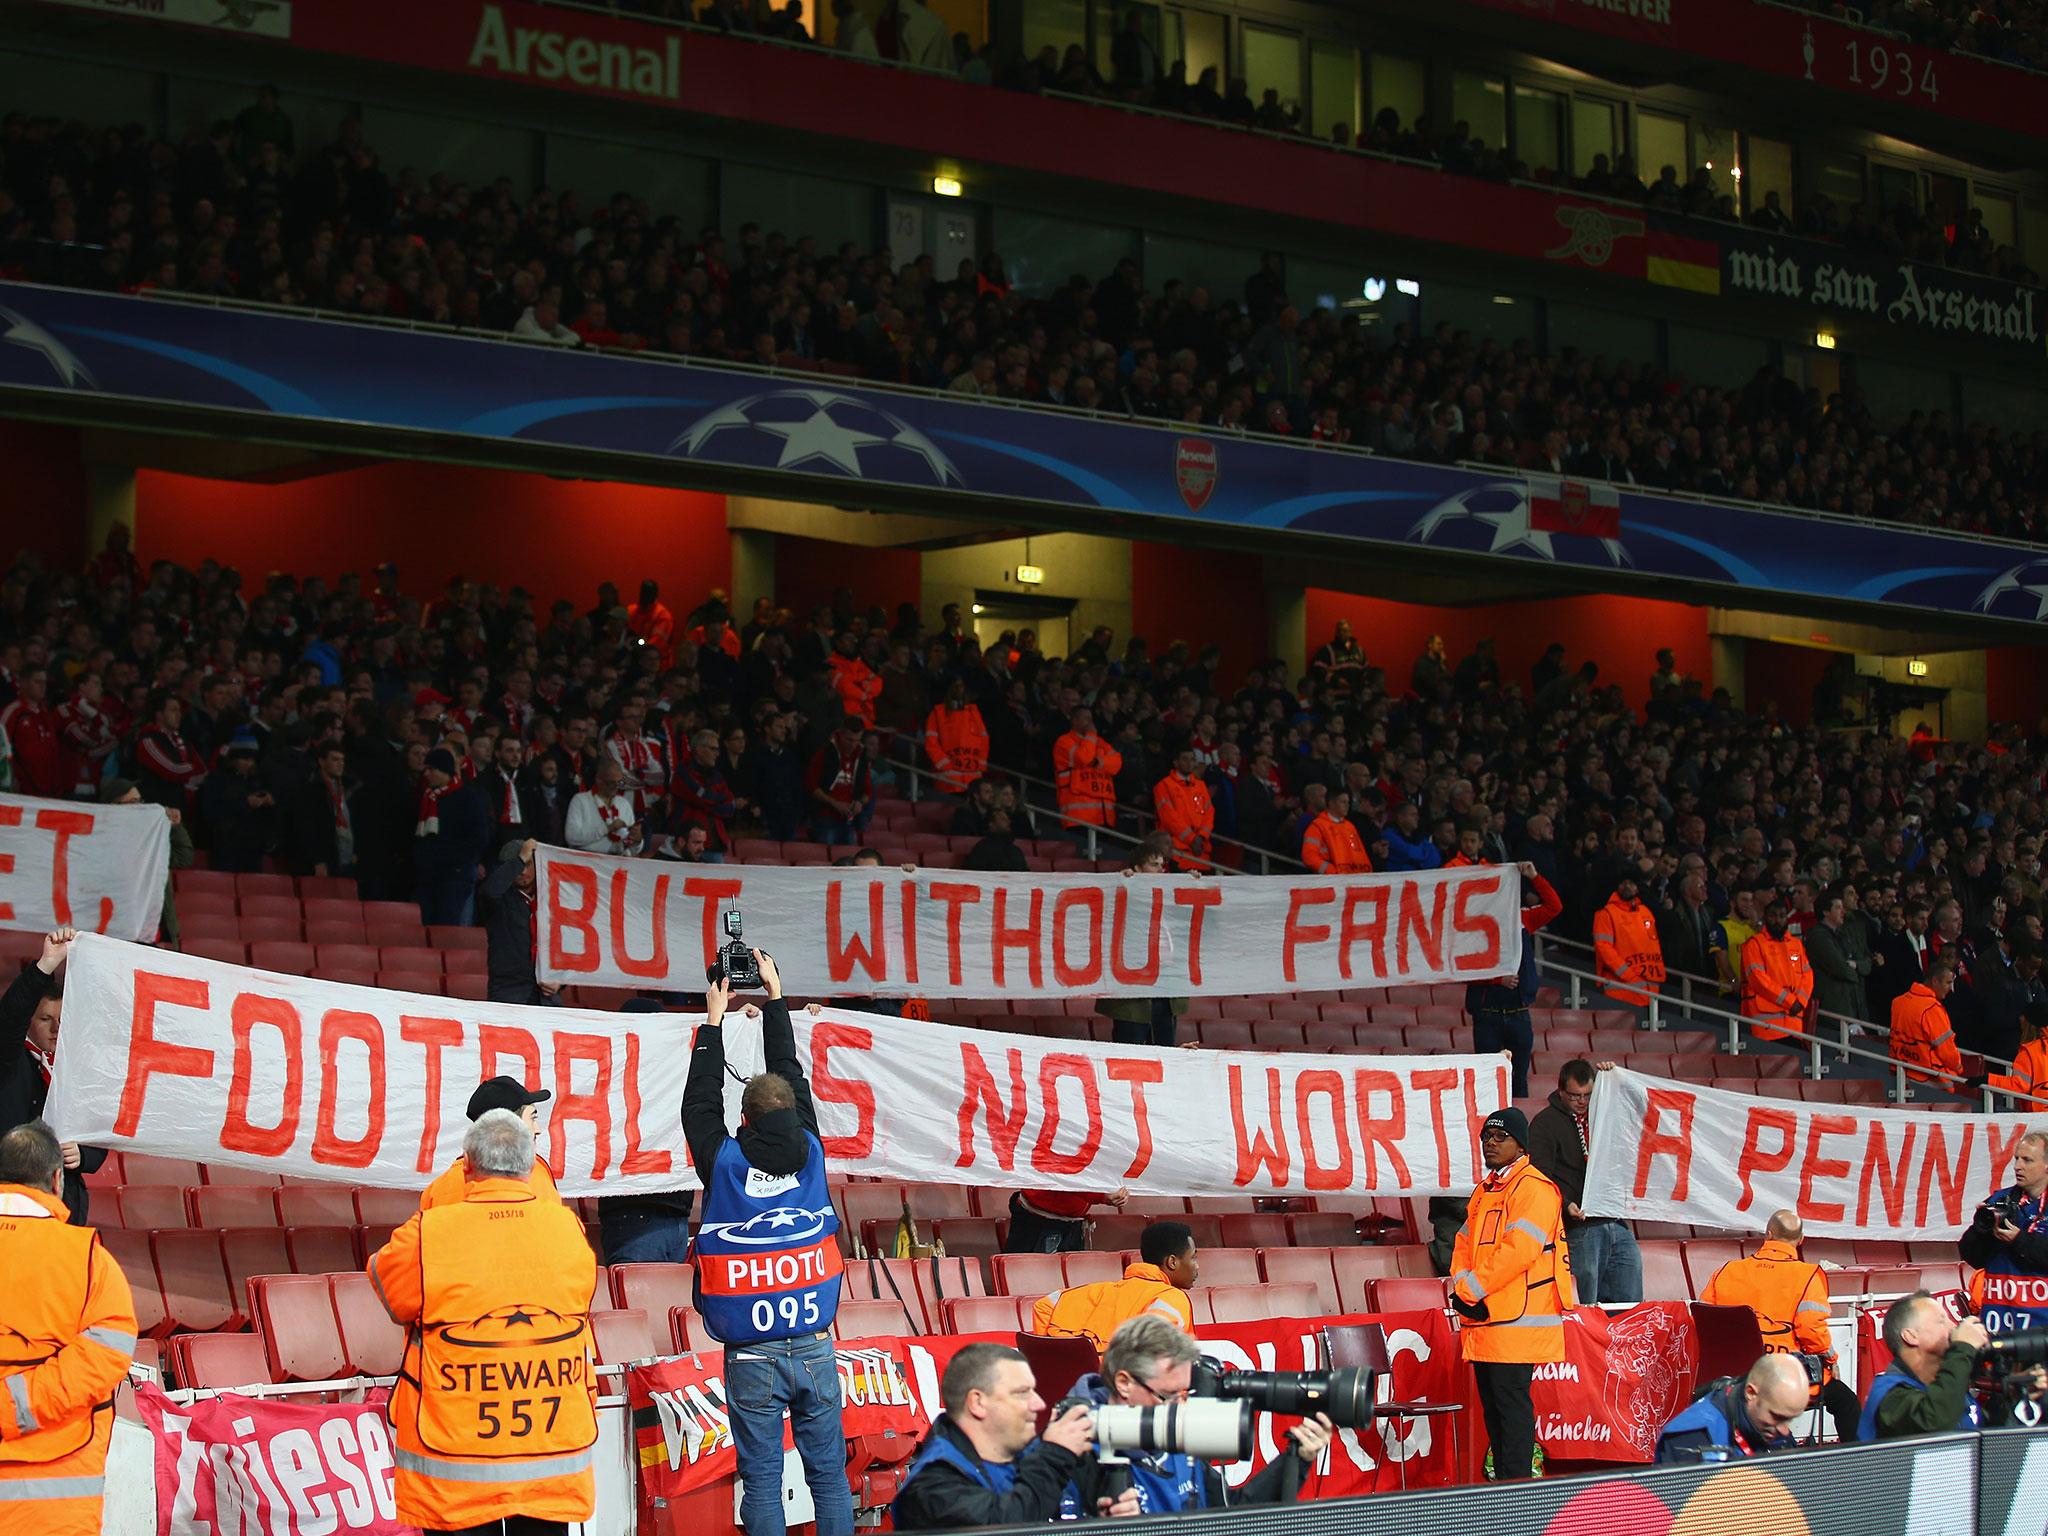 Arsenal fans have already started selling tickets for the second leg against Bayern Munich